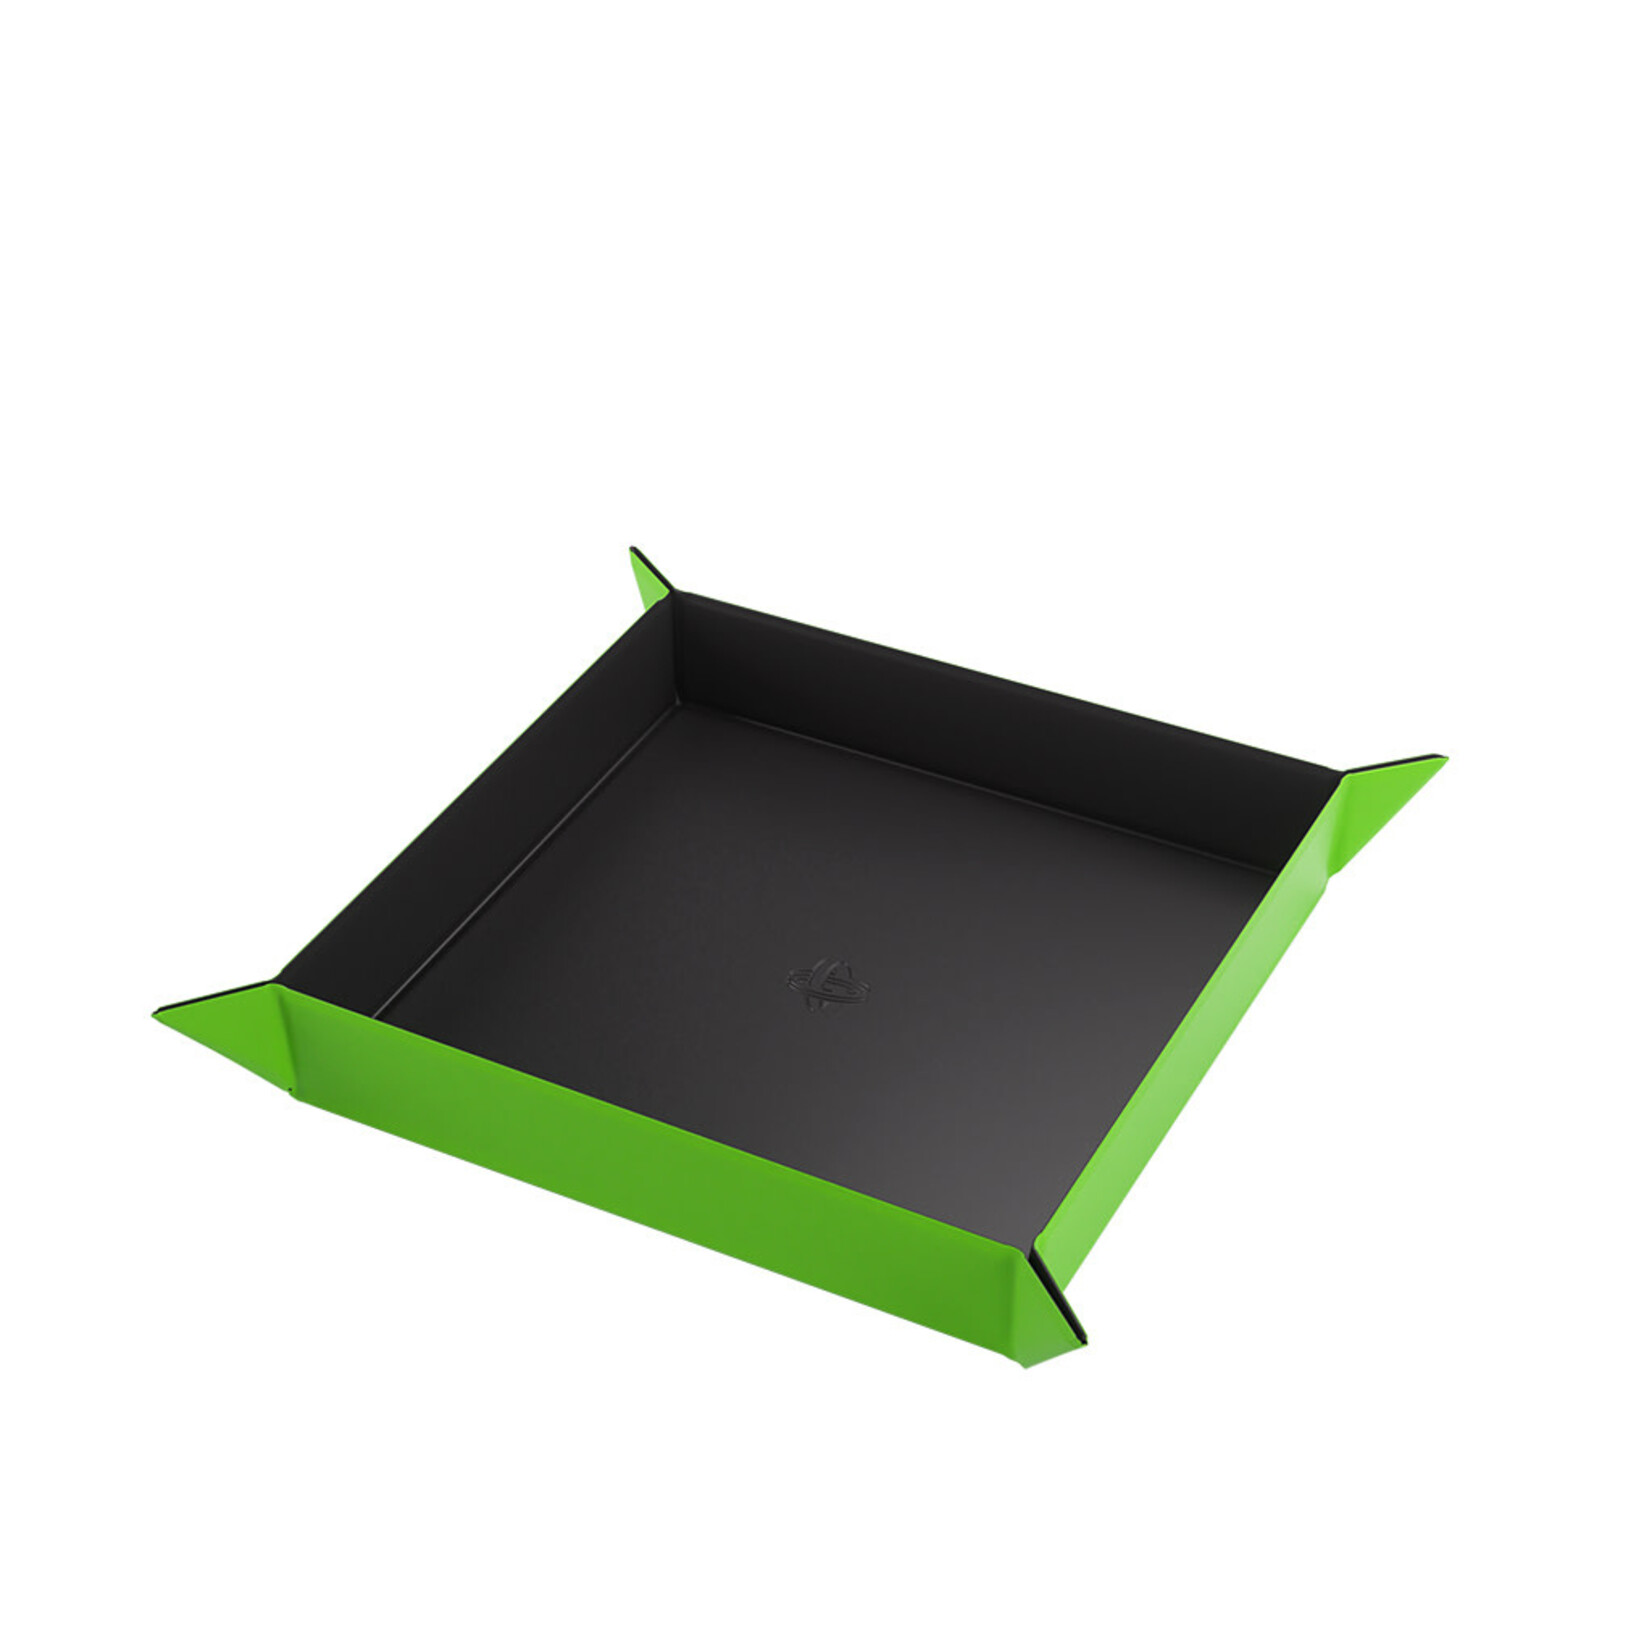 Gamegenic Gamegenic: Magnetic Dice Tray Square